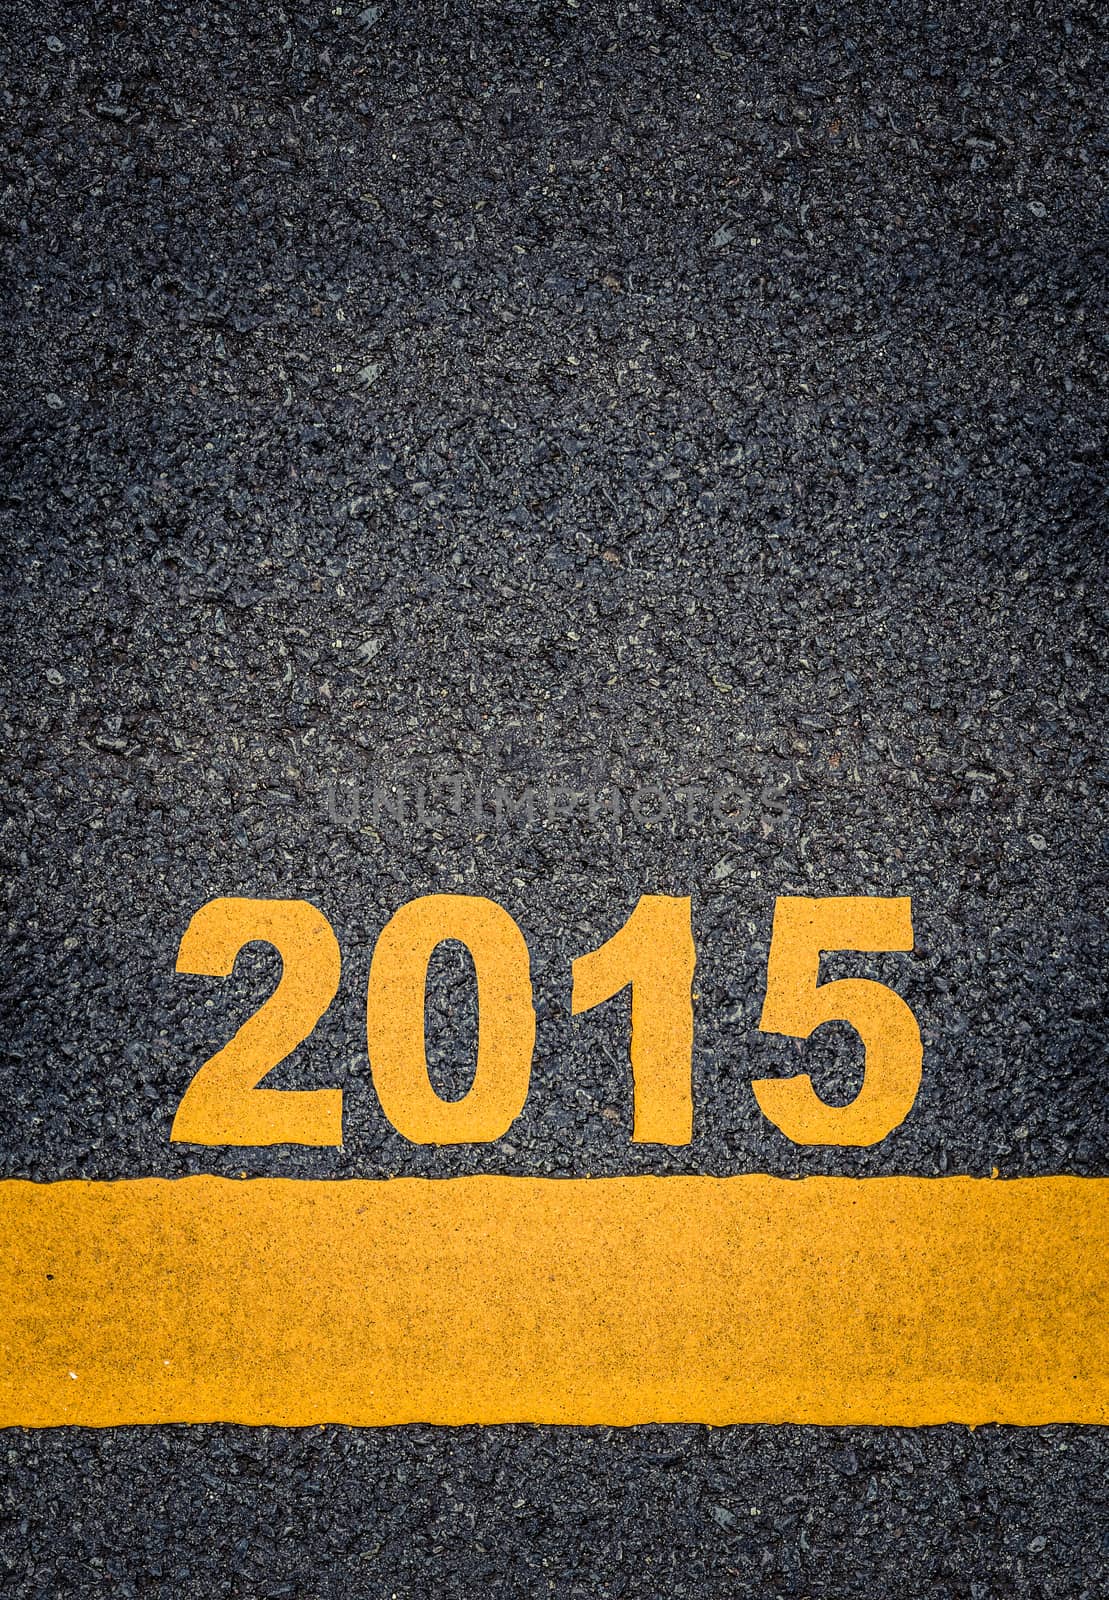 Conceptual Image Of Year 2015 As Yellow Asphalt Road Markings With Single Line And Copy Space